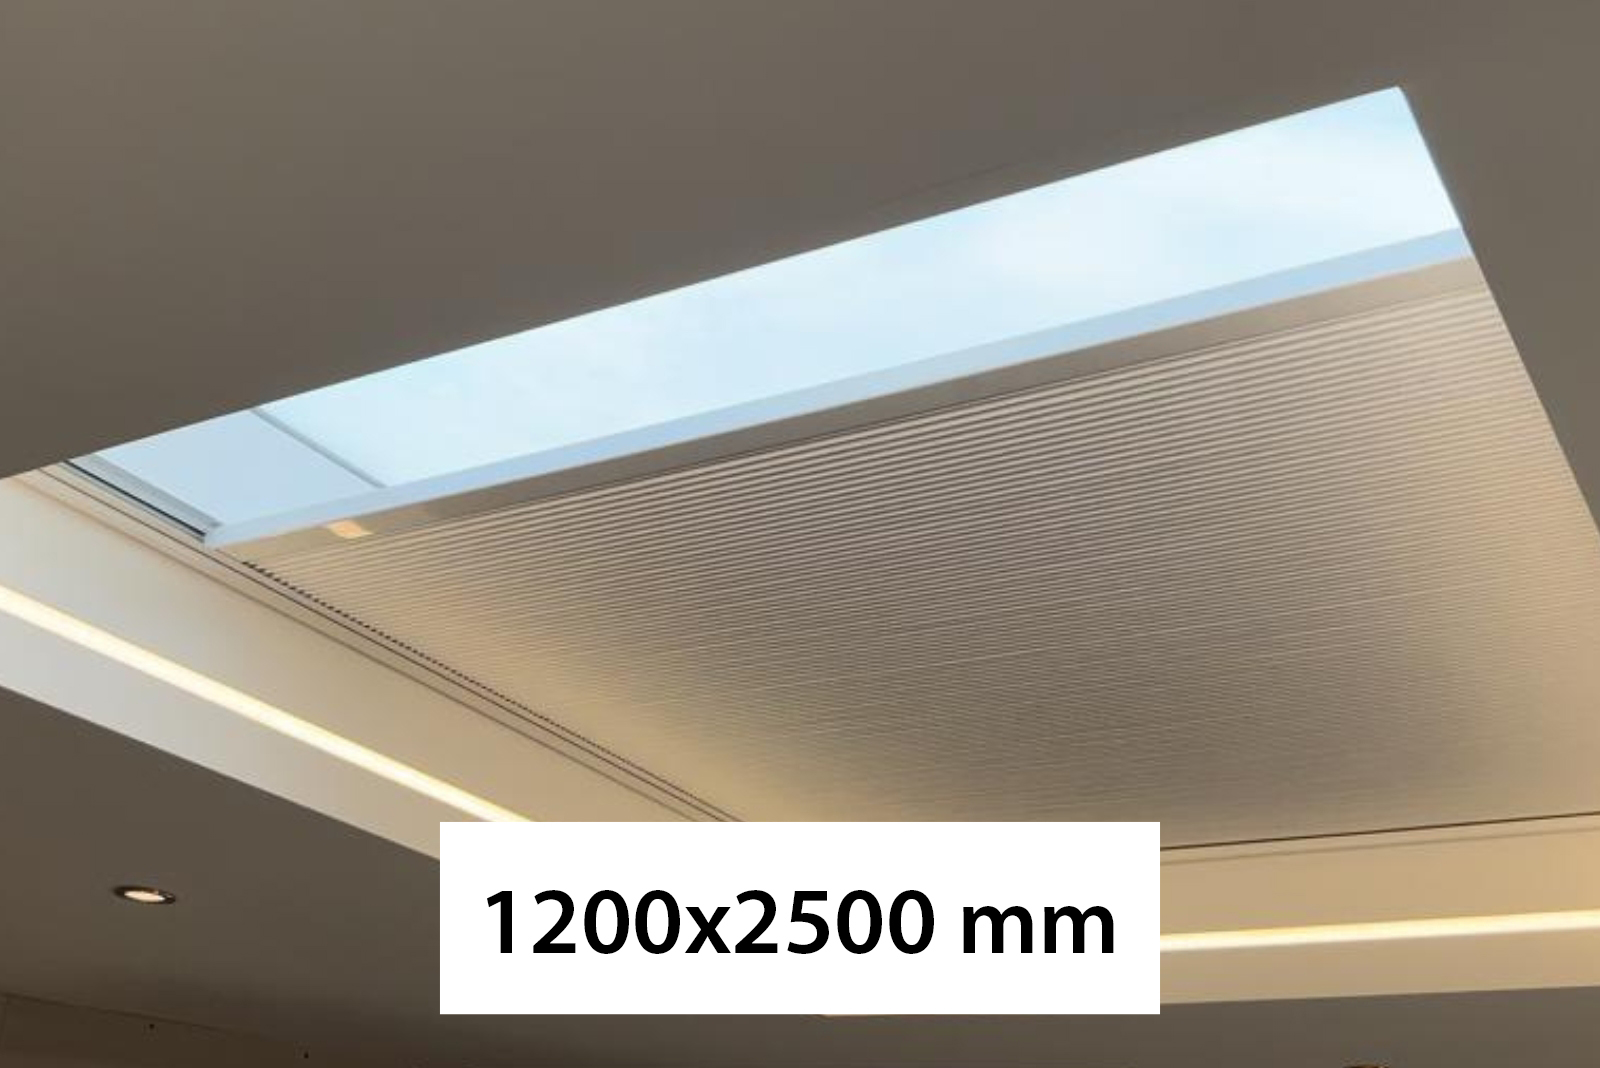 Electric Blinds for Flat Roof Skylight 1200x2500mm - Saris-Extensions.co.uk